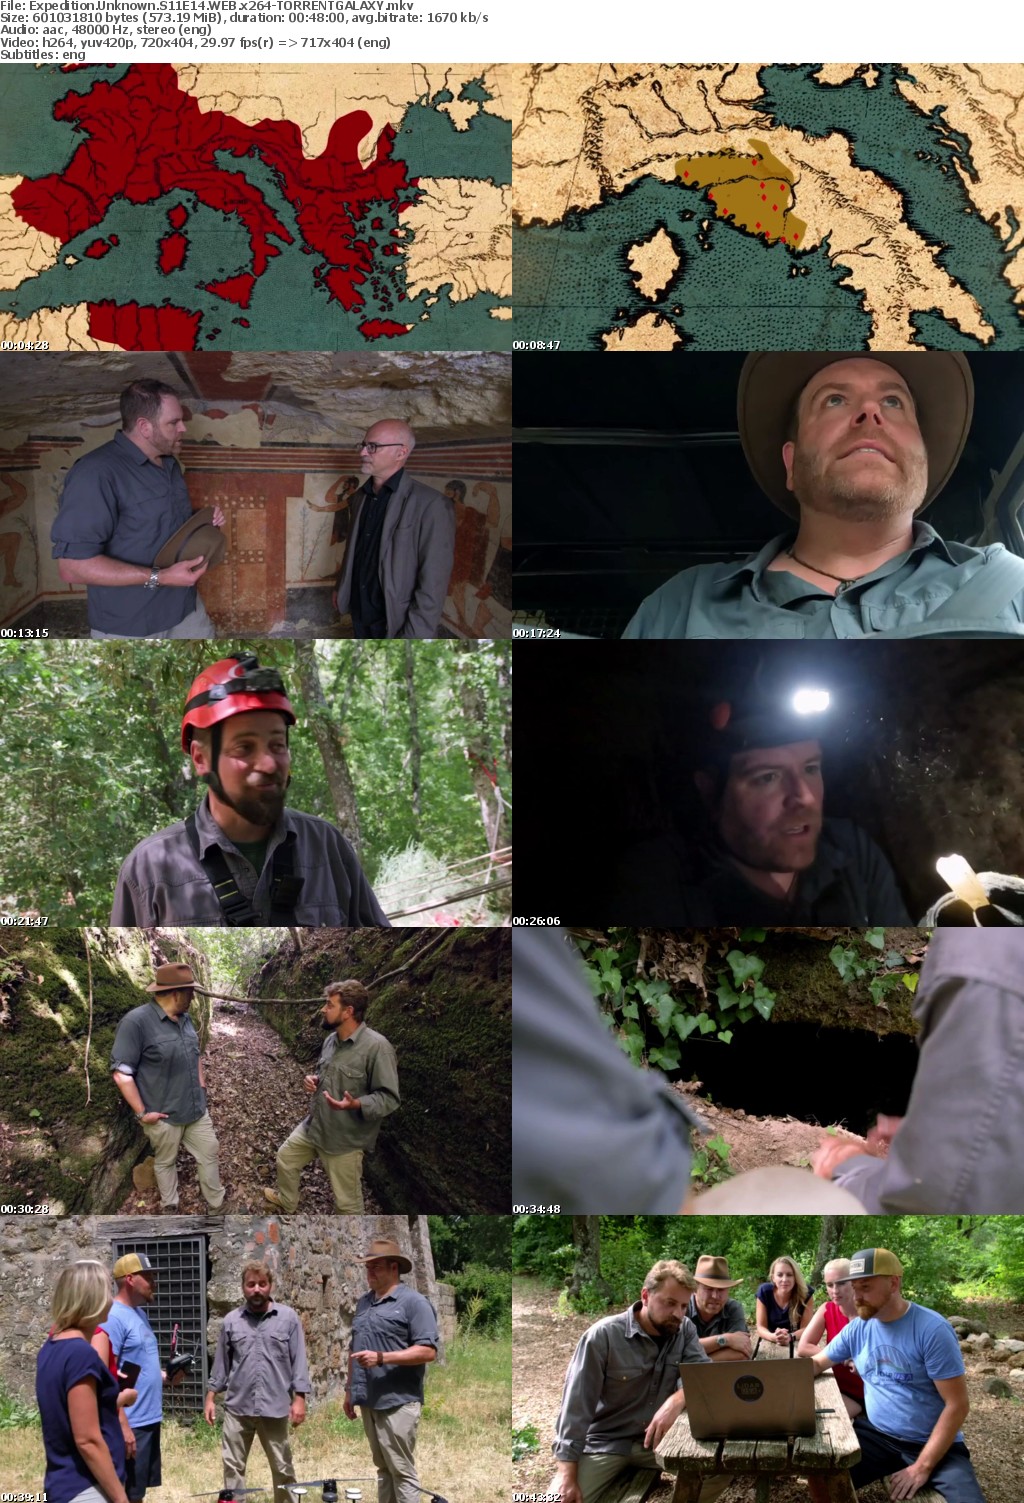 Expedition Unknown S11E14 WEB x264-GALAXY